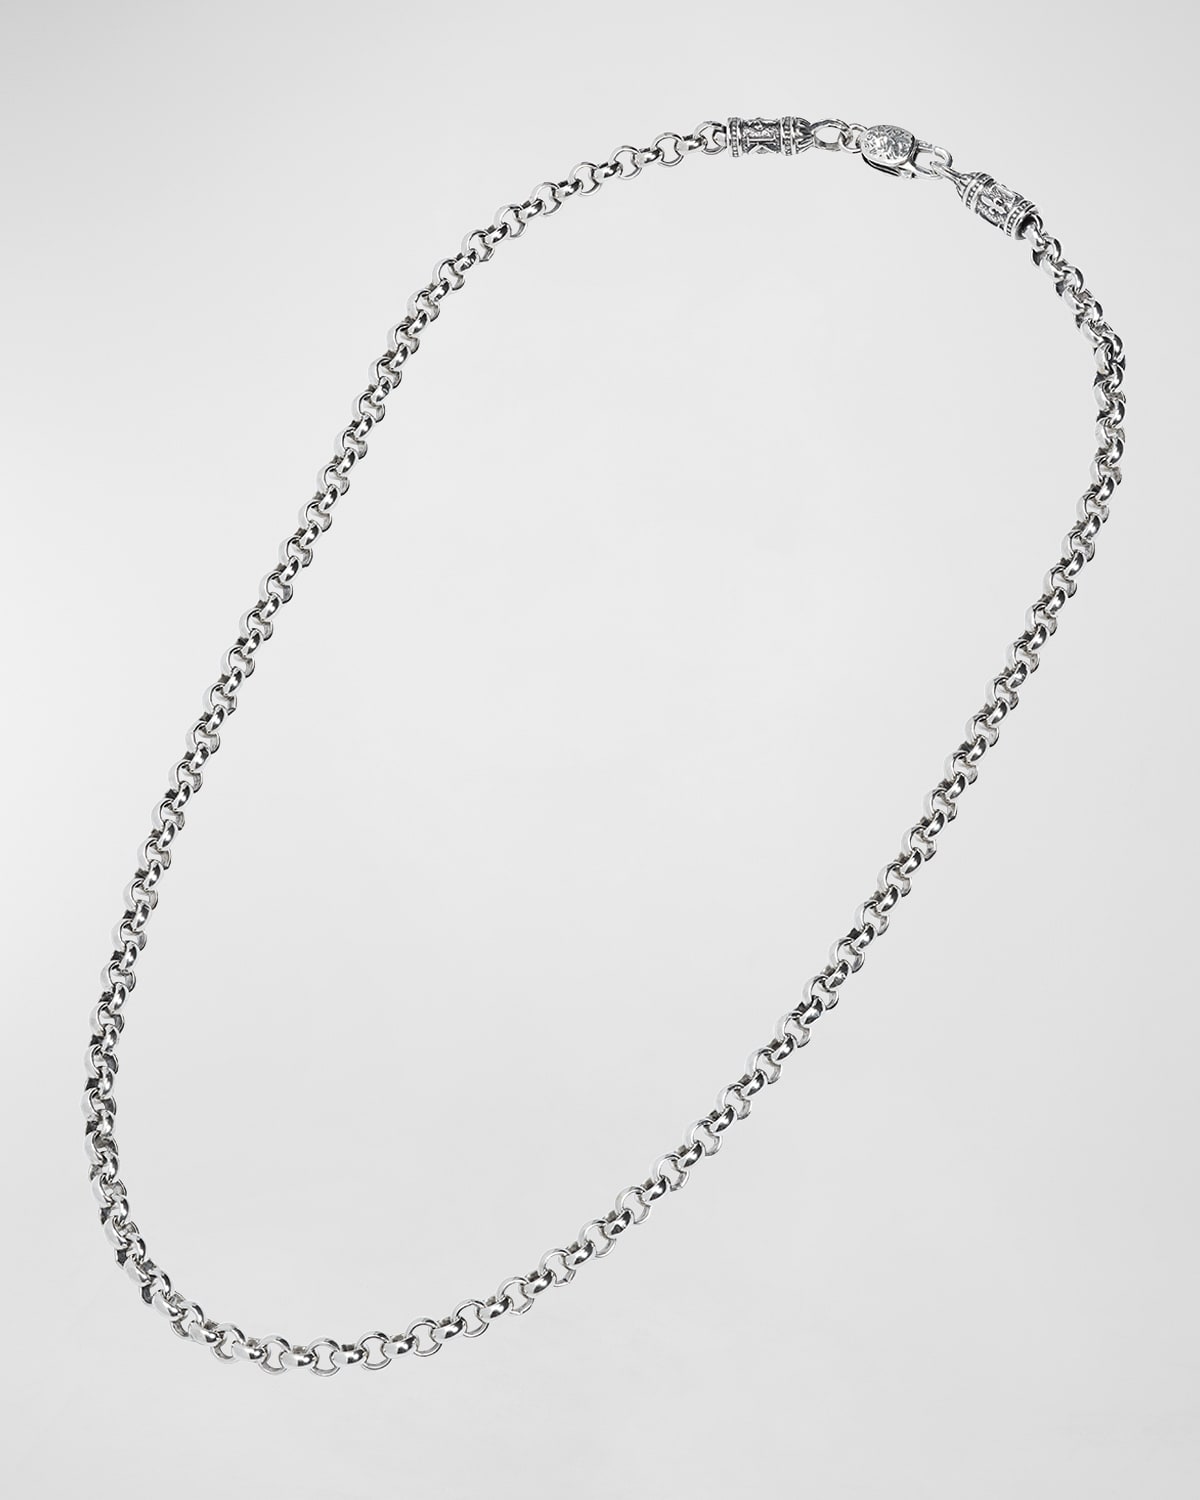 Shop Konstantino Men's Sterling Silver Cable Chain Necklace, 24"l